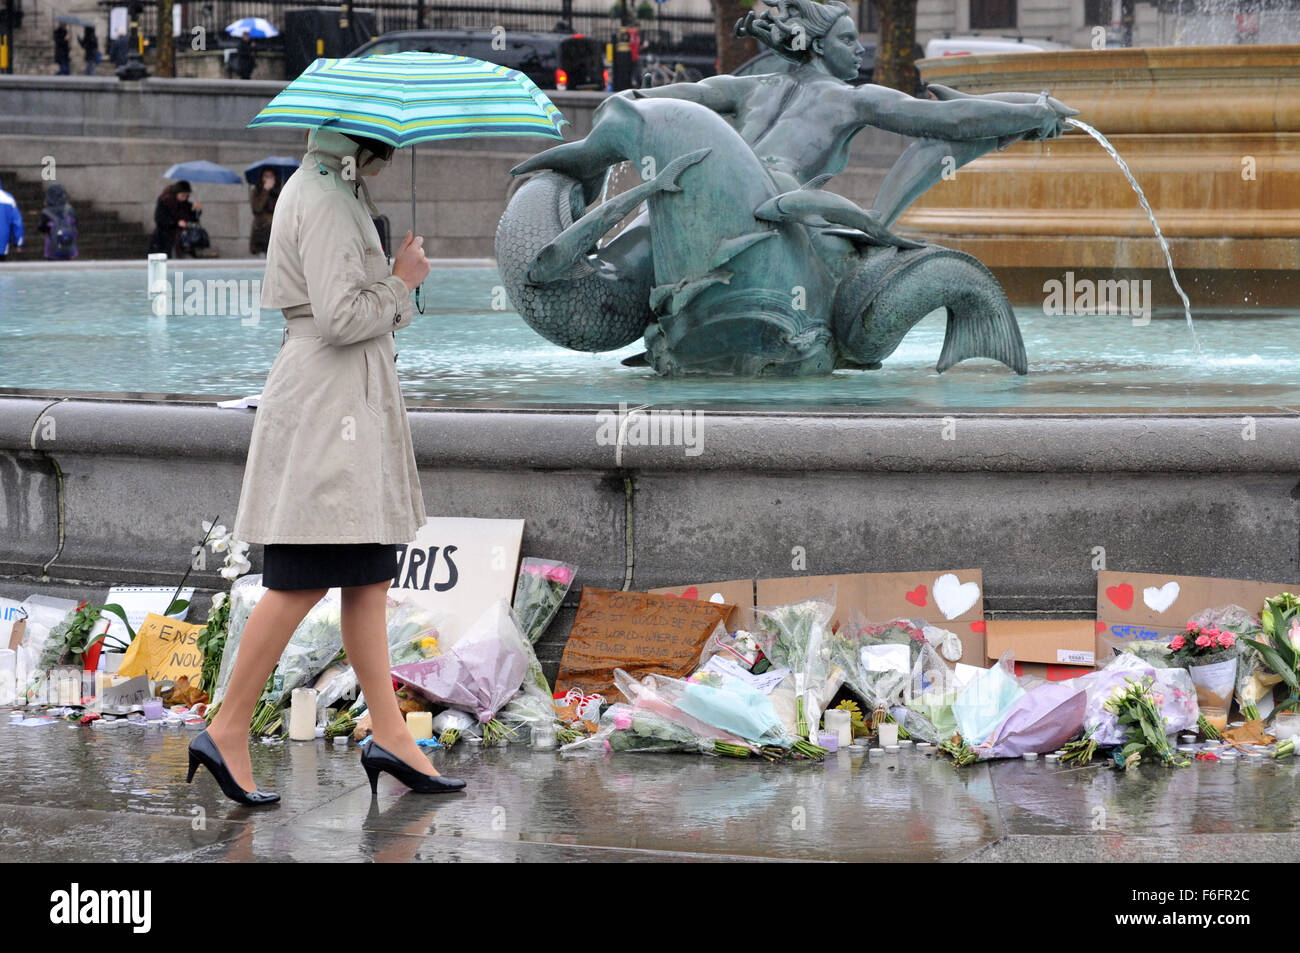 London, UK. 17th November, 2015. A stylishly dressed women reflects at the tribute to those killed in the Paris massacre at the fountain on Trafalgar Square. The heavy rain which the rest of the country has been experiencing reaches London. Credit:  JOHNNY ARMSTEAD/Alamy Live News Stock Photo